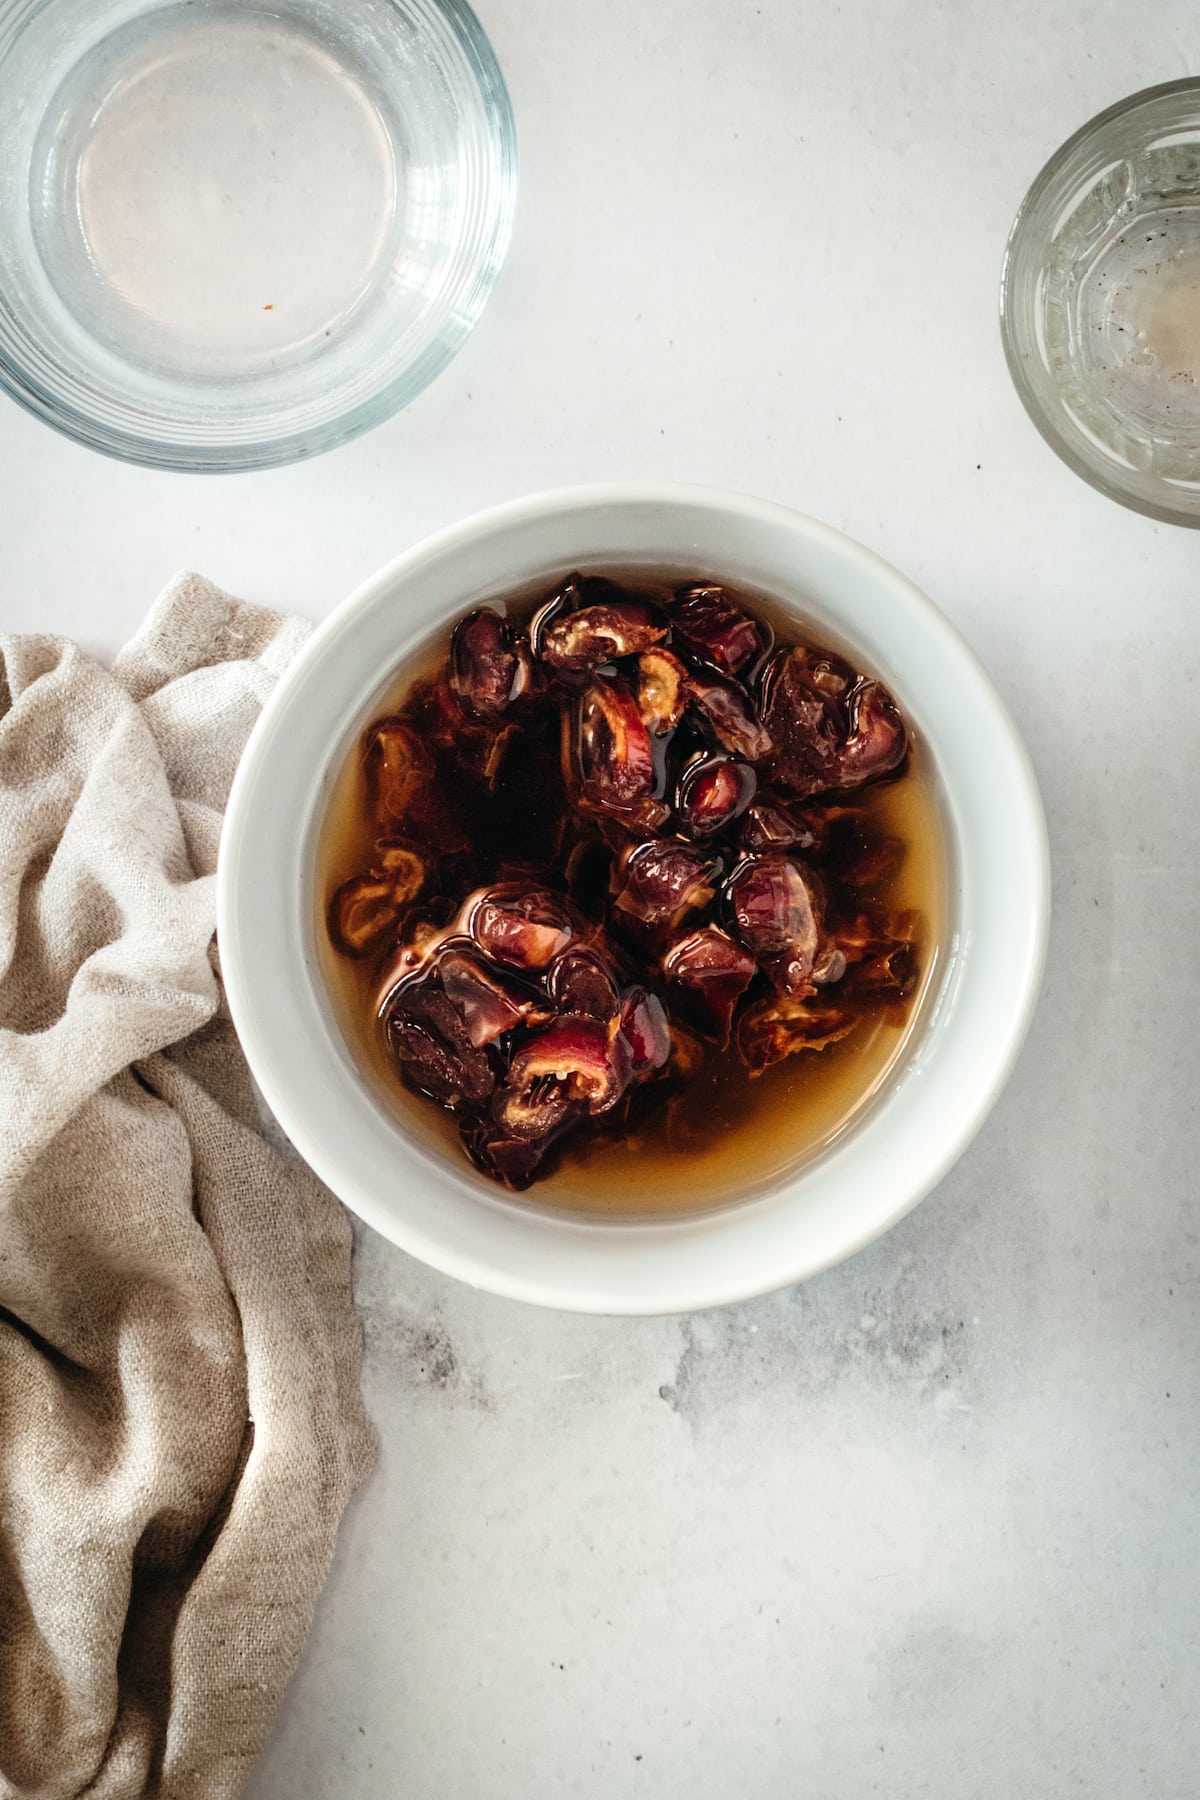 Overhead view of Kahlua and dates in bowl